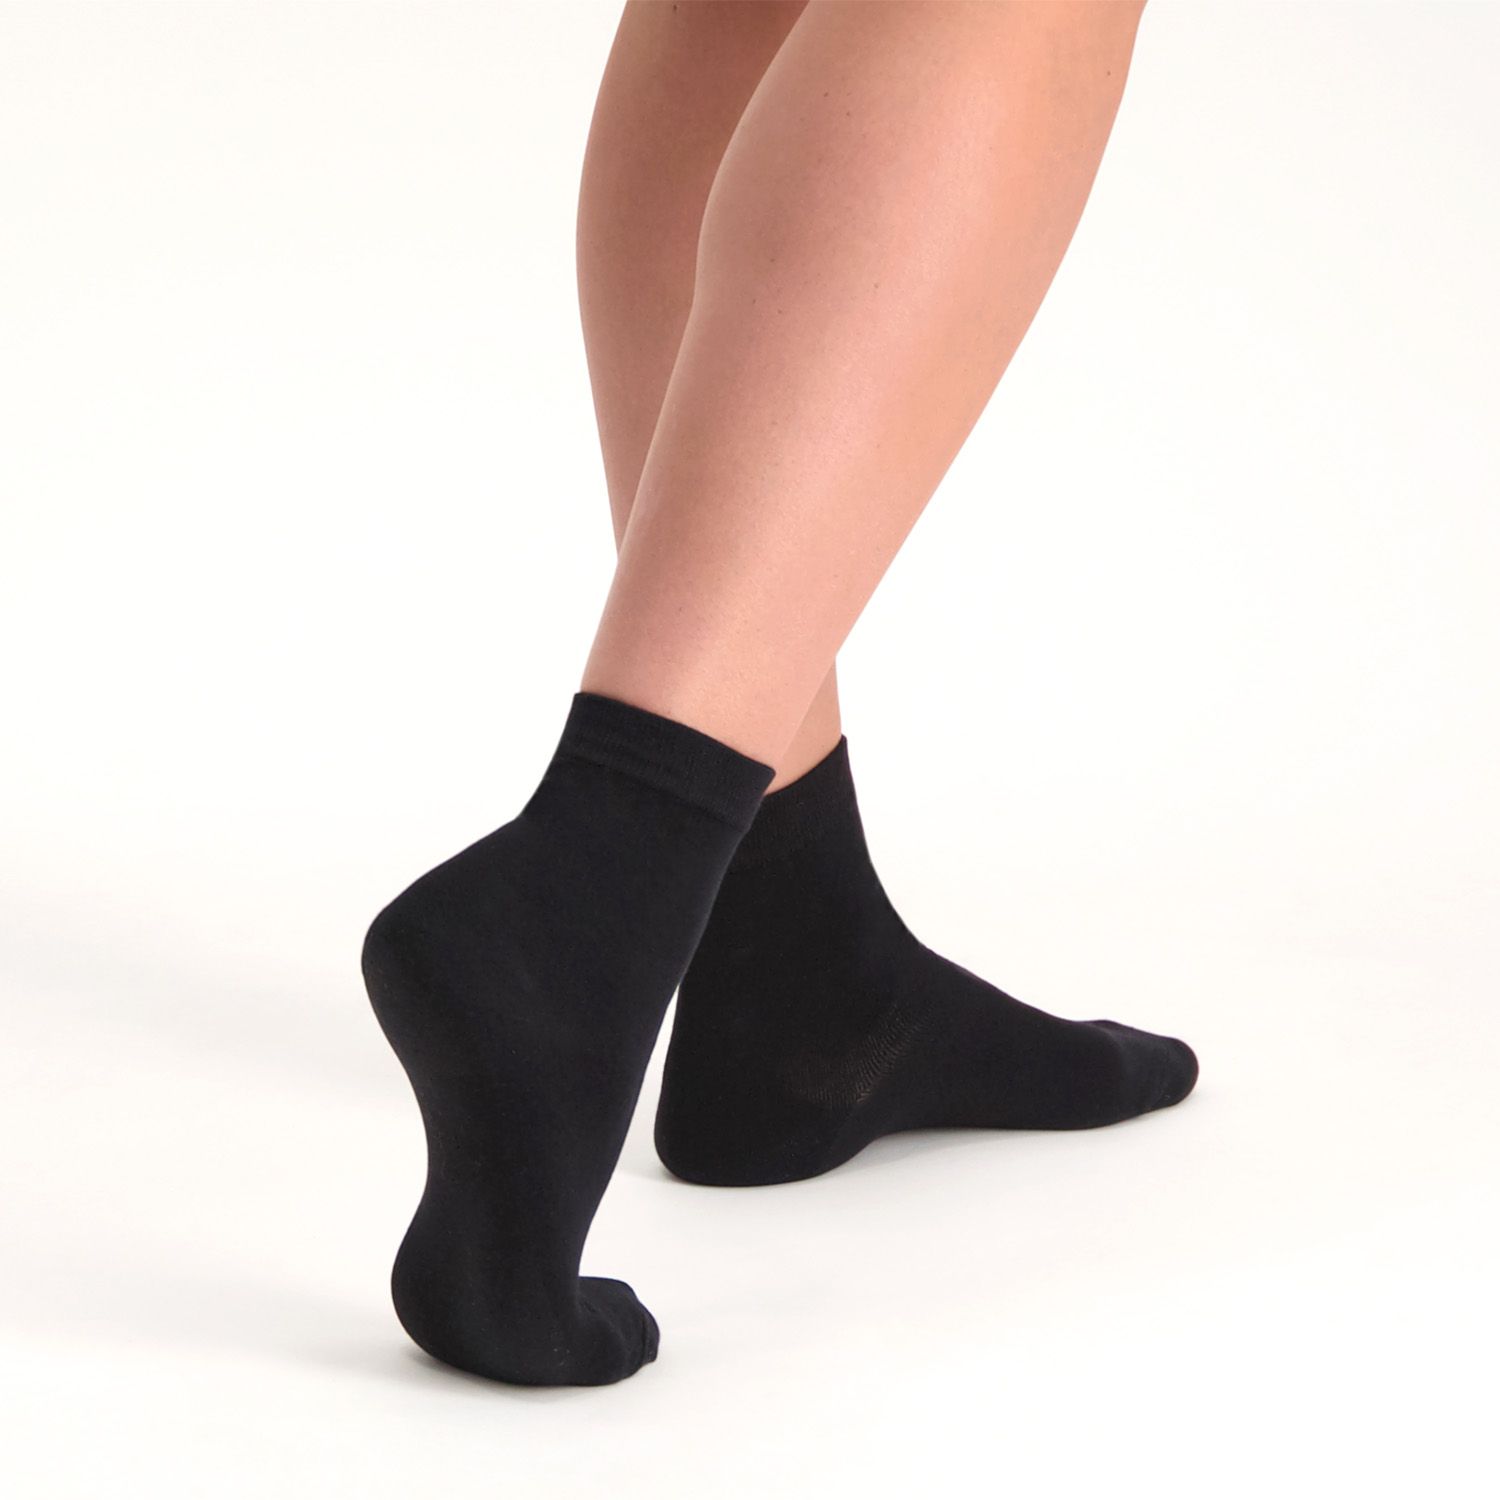 solelution socks with silicone gel heel side view